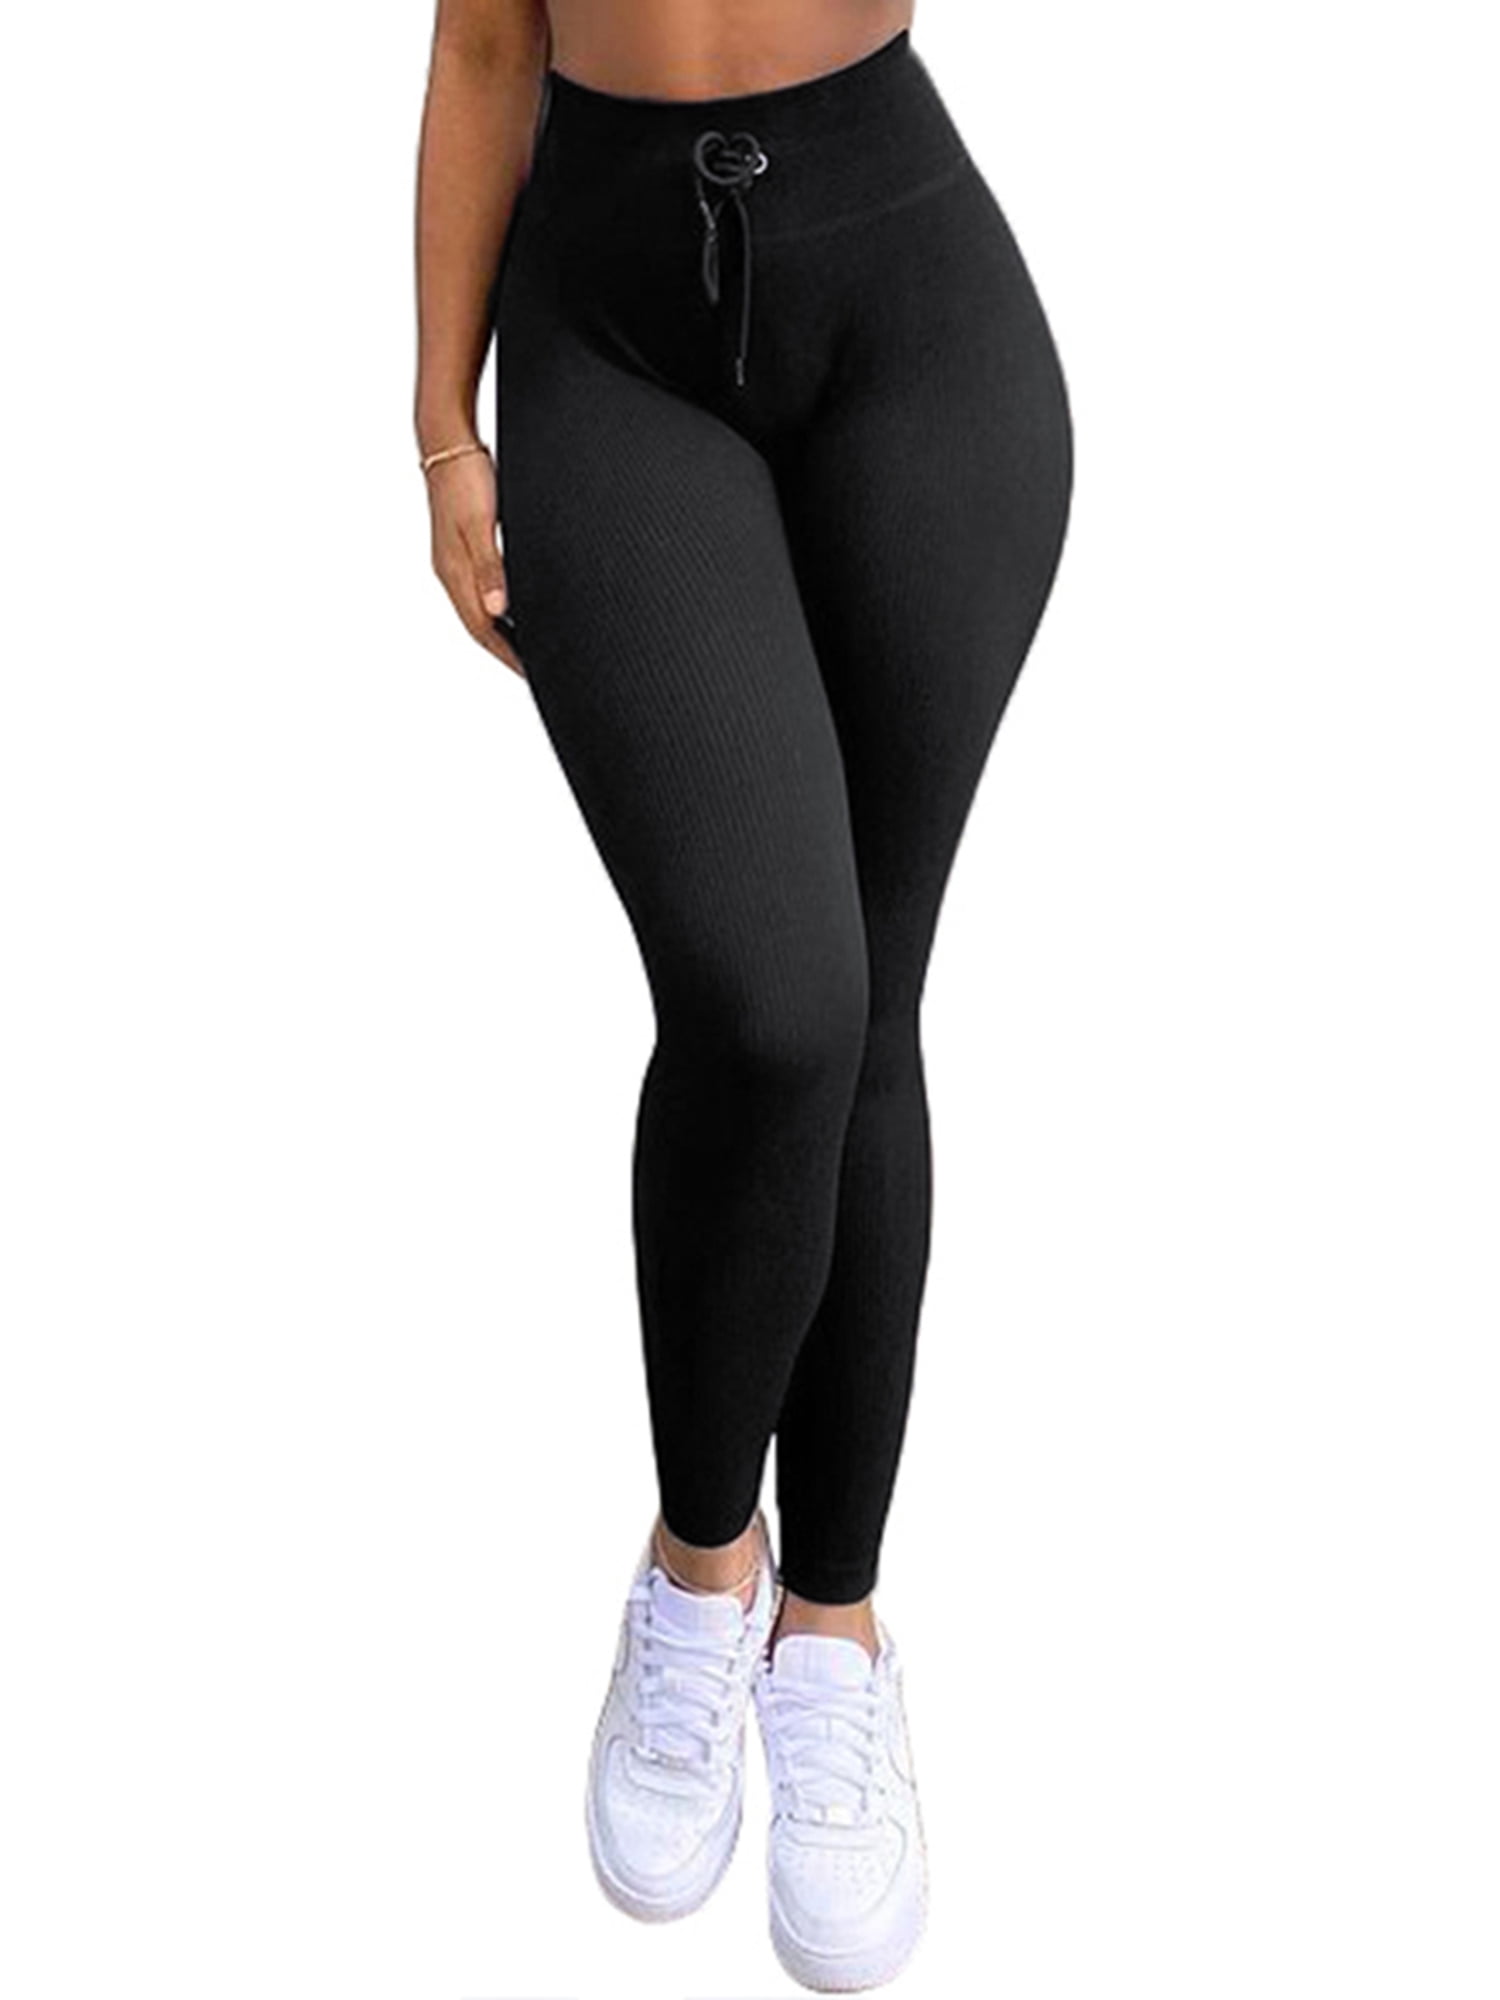 Bebiullo Butt Lifting Anti Cellulite Leggings for Women High Waisted Yoga  Pants Workout Tummy Control Sport Tights Black L